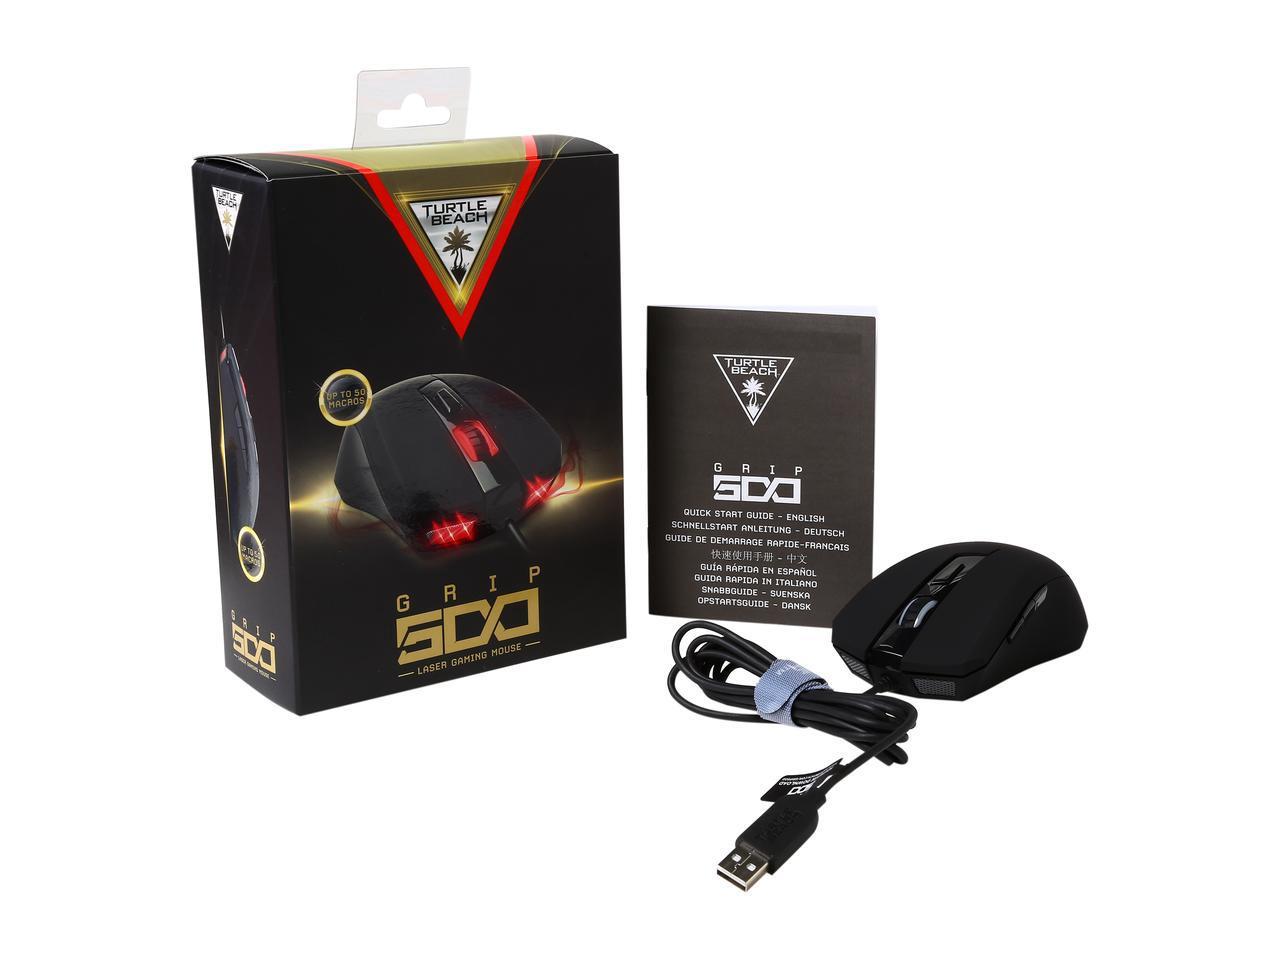 Hardware Review: Turtle Beach Grip 500 Laser Gaming Mouse